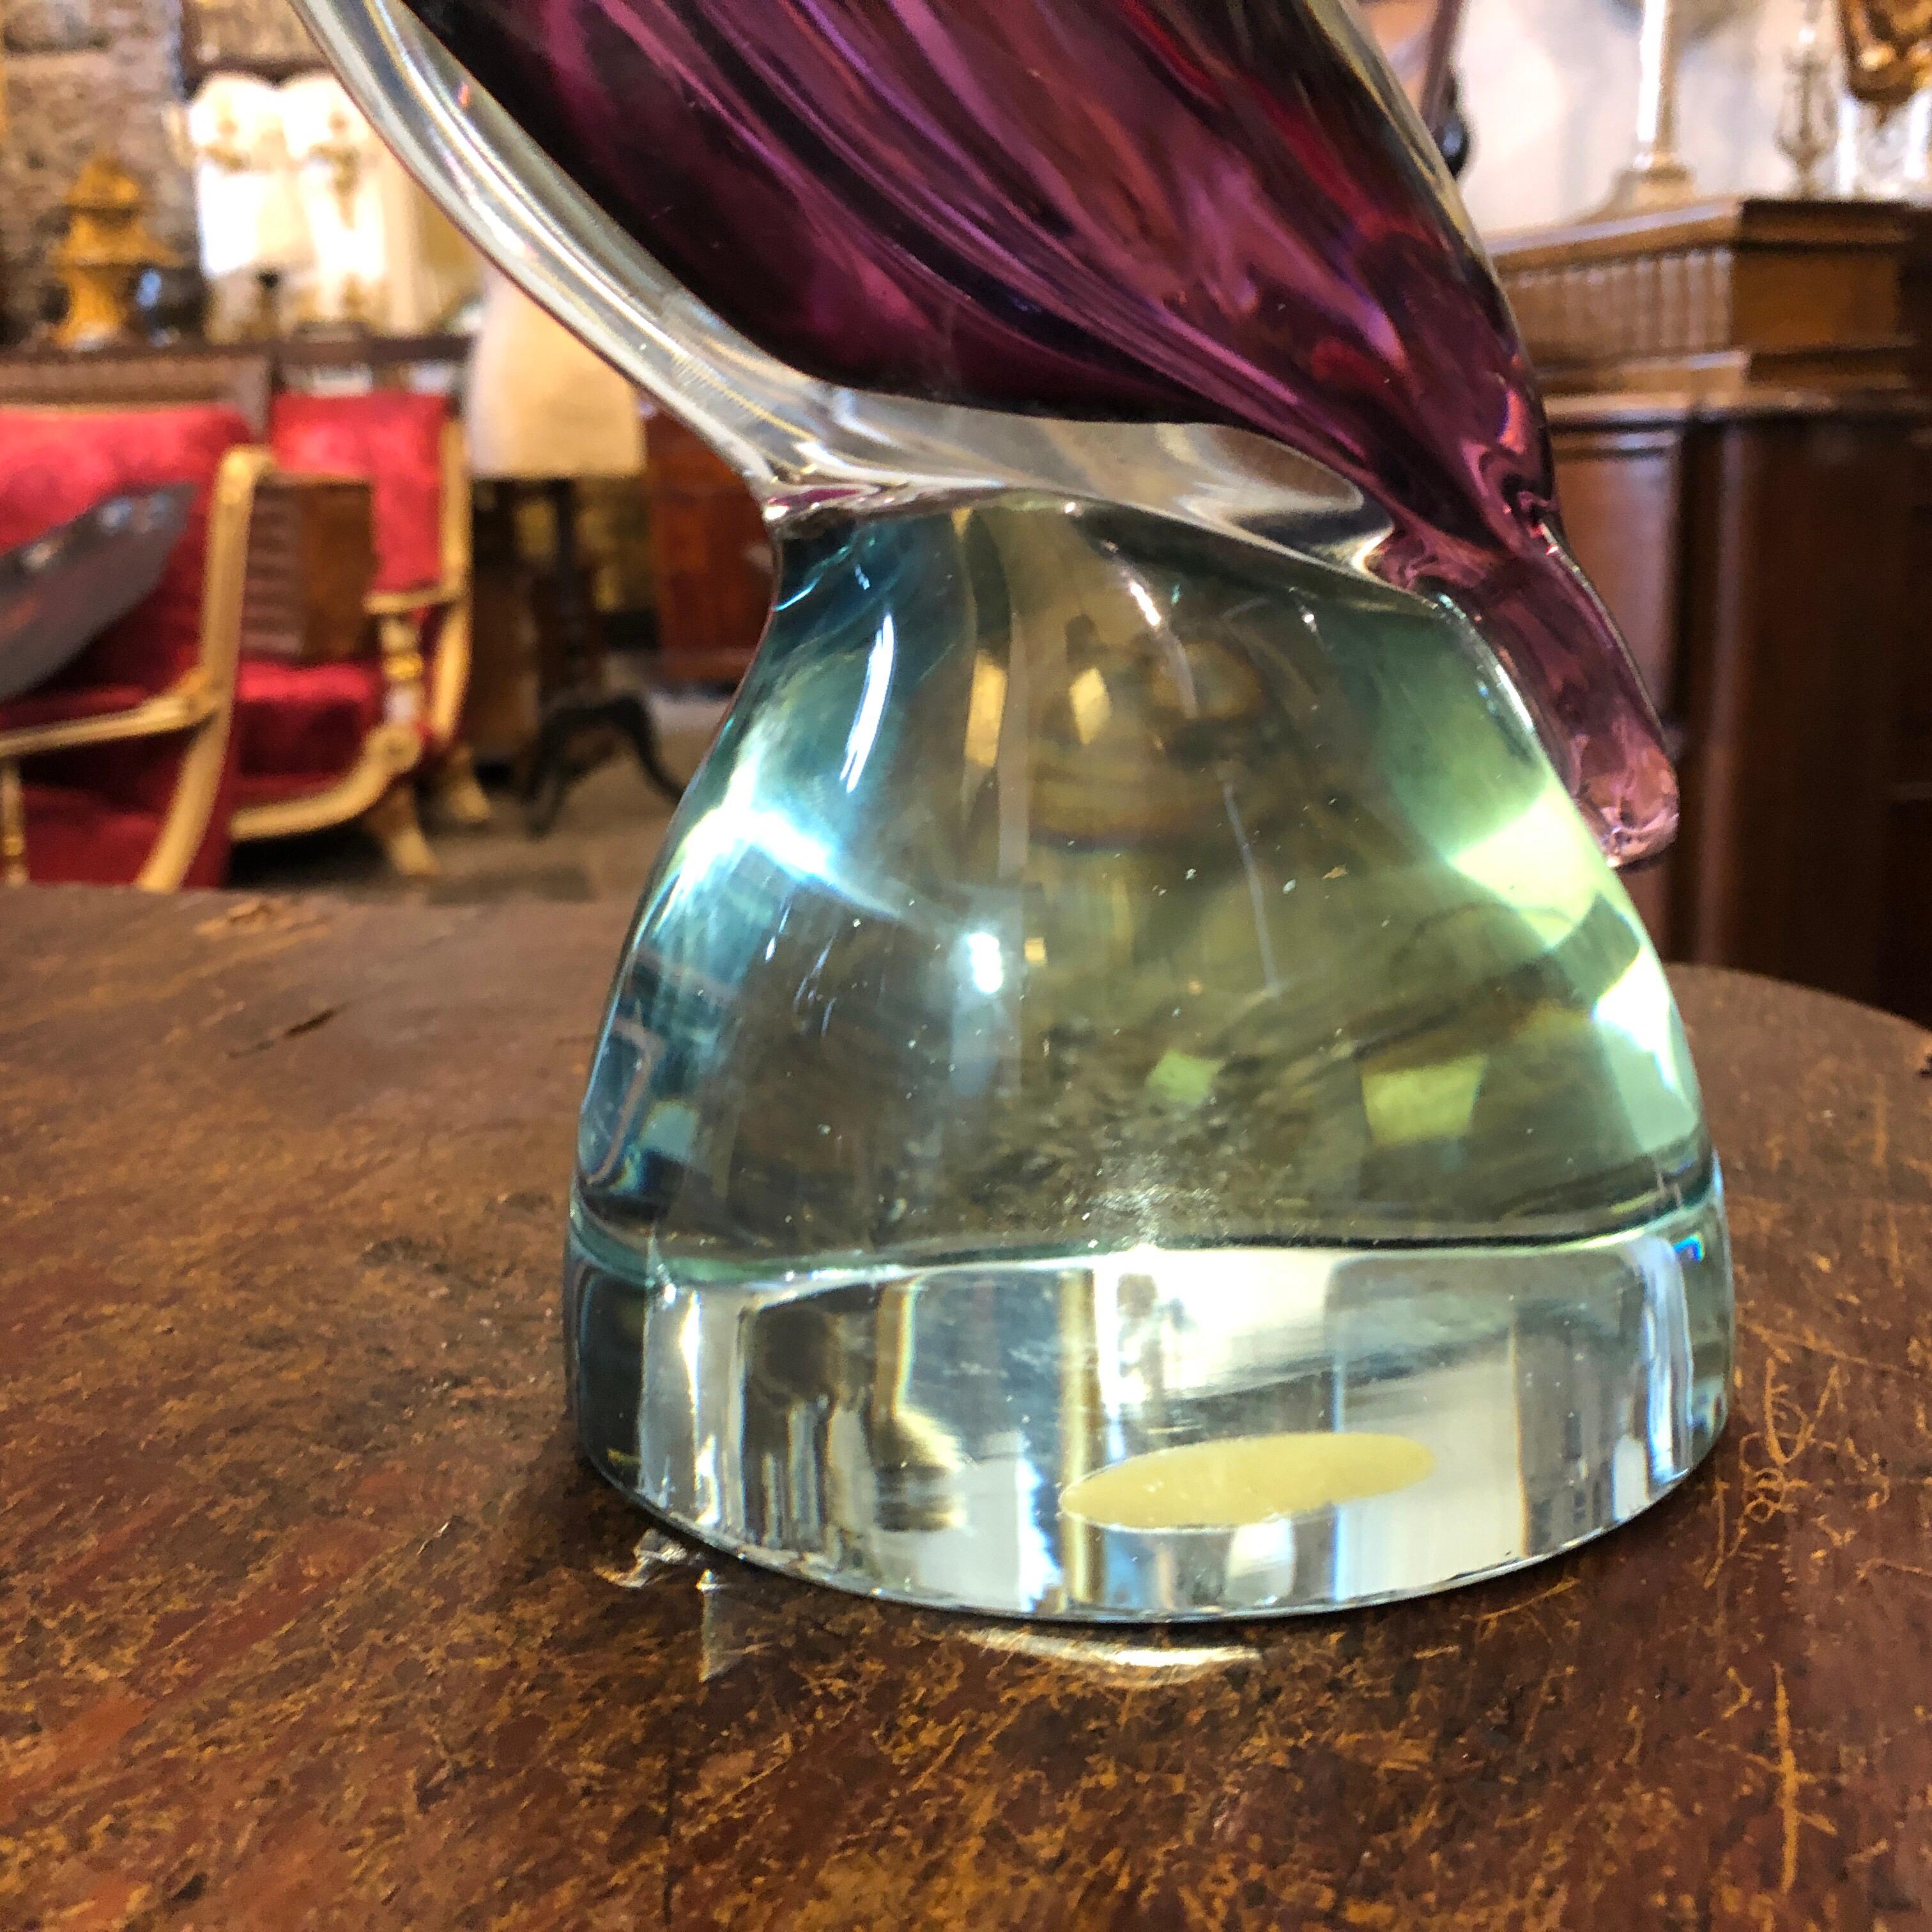 Stylish purple and blue Murano glass sculpture of a bird in perfect conditions.